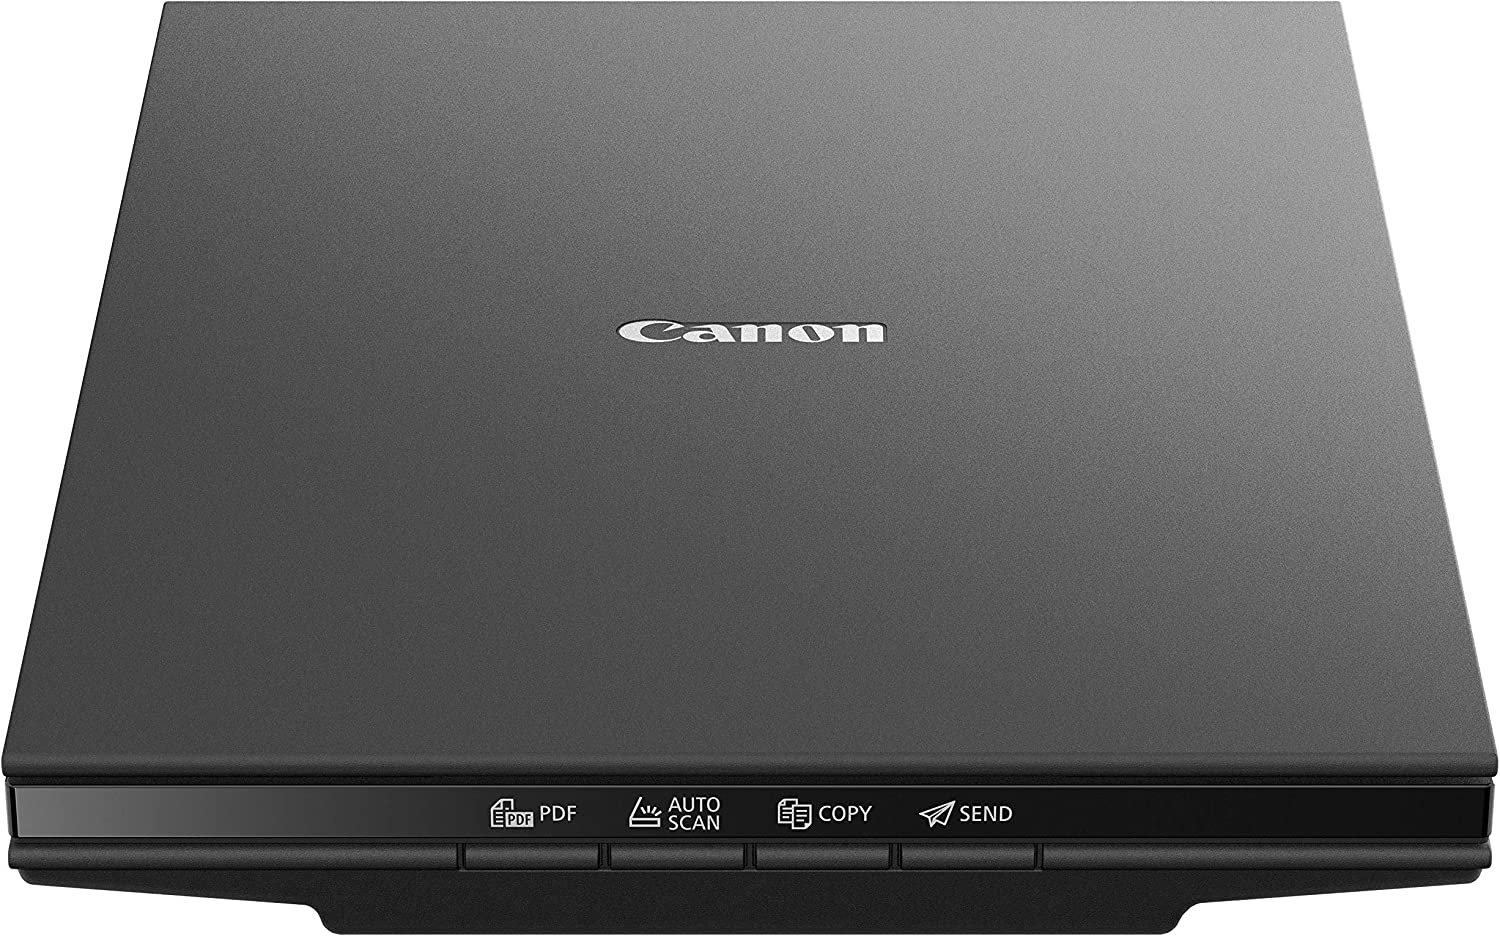 Canon Cano Scan Lide 300 Scanner